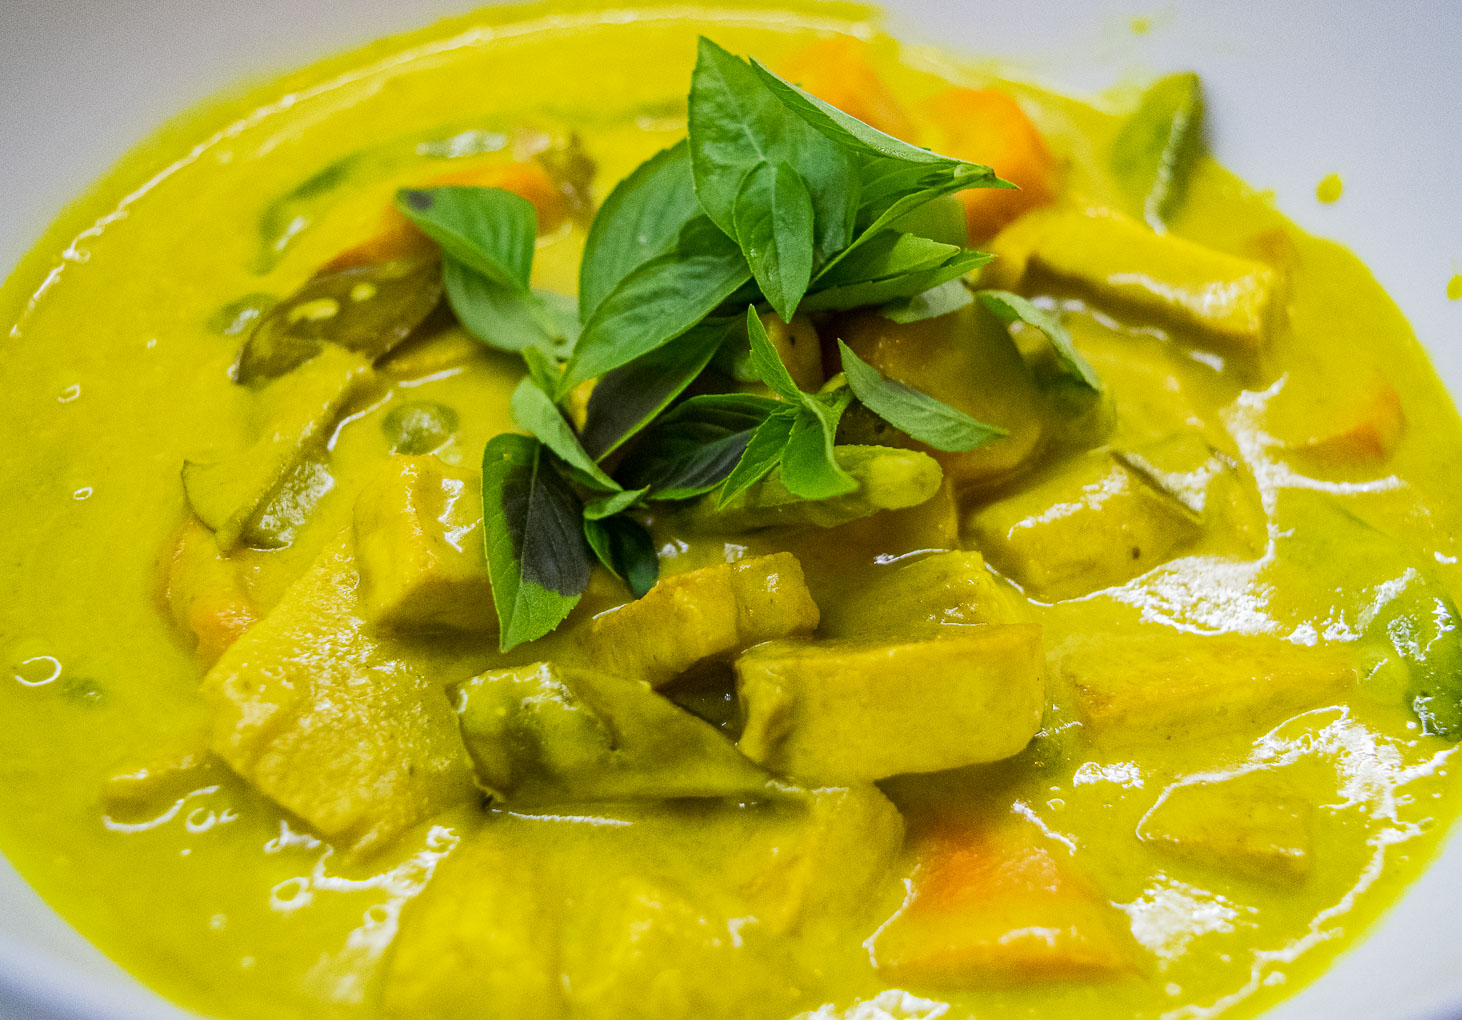 alt="brightly colored yellow curry decorated with green Thai basil."